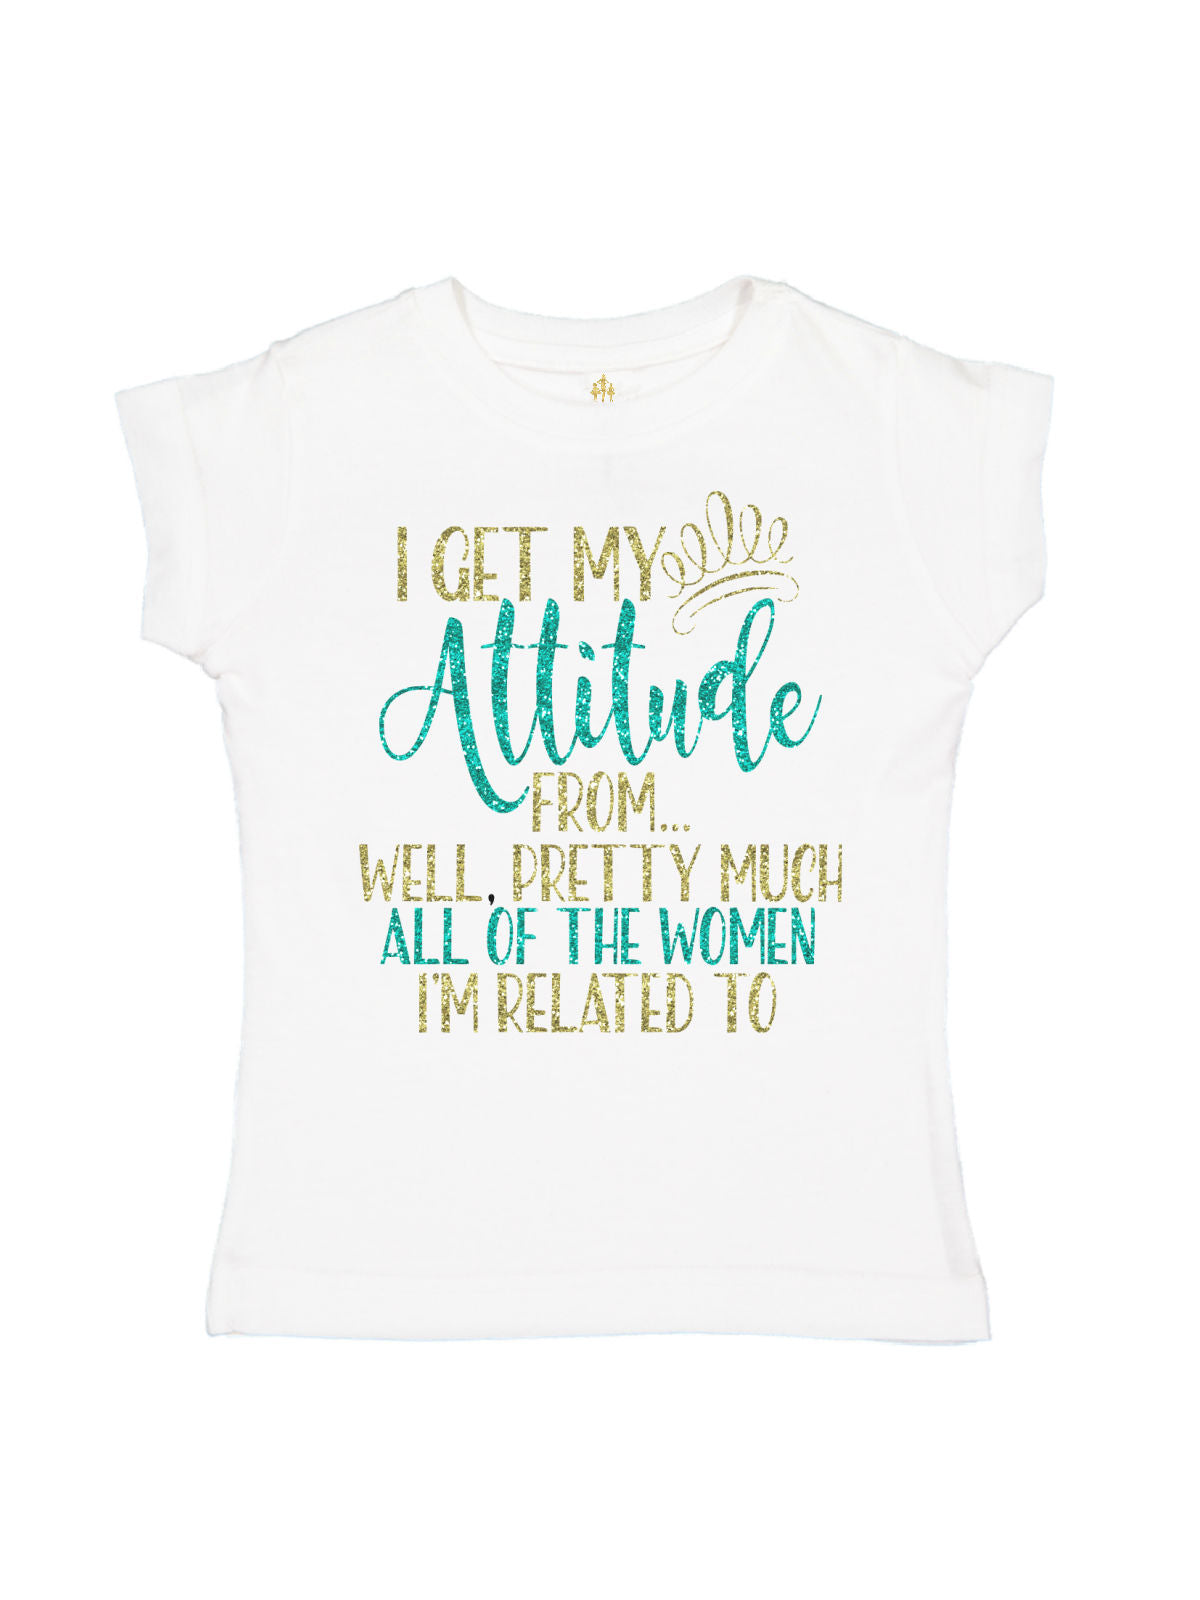 I Get My Attitude From Well Pretty Much All Of The Women I'm Related To Girls Shirt in White